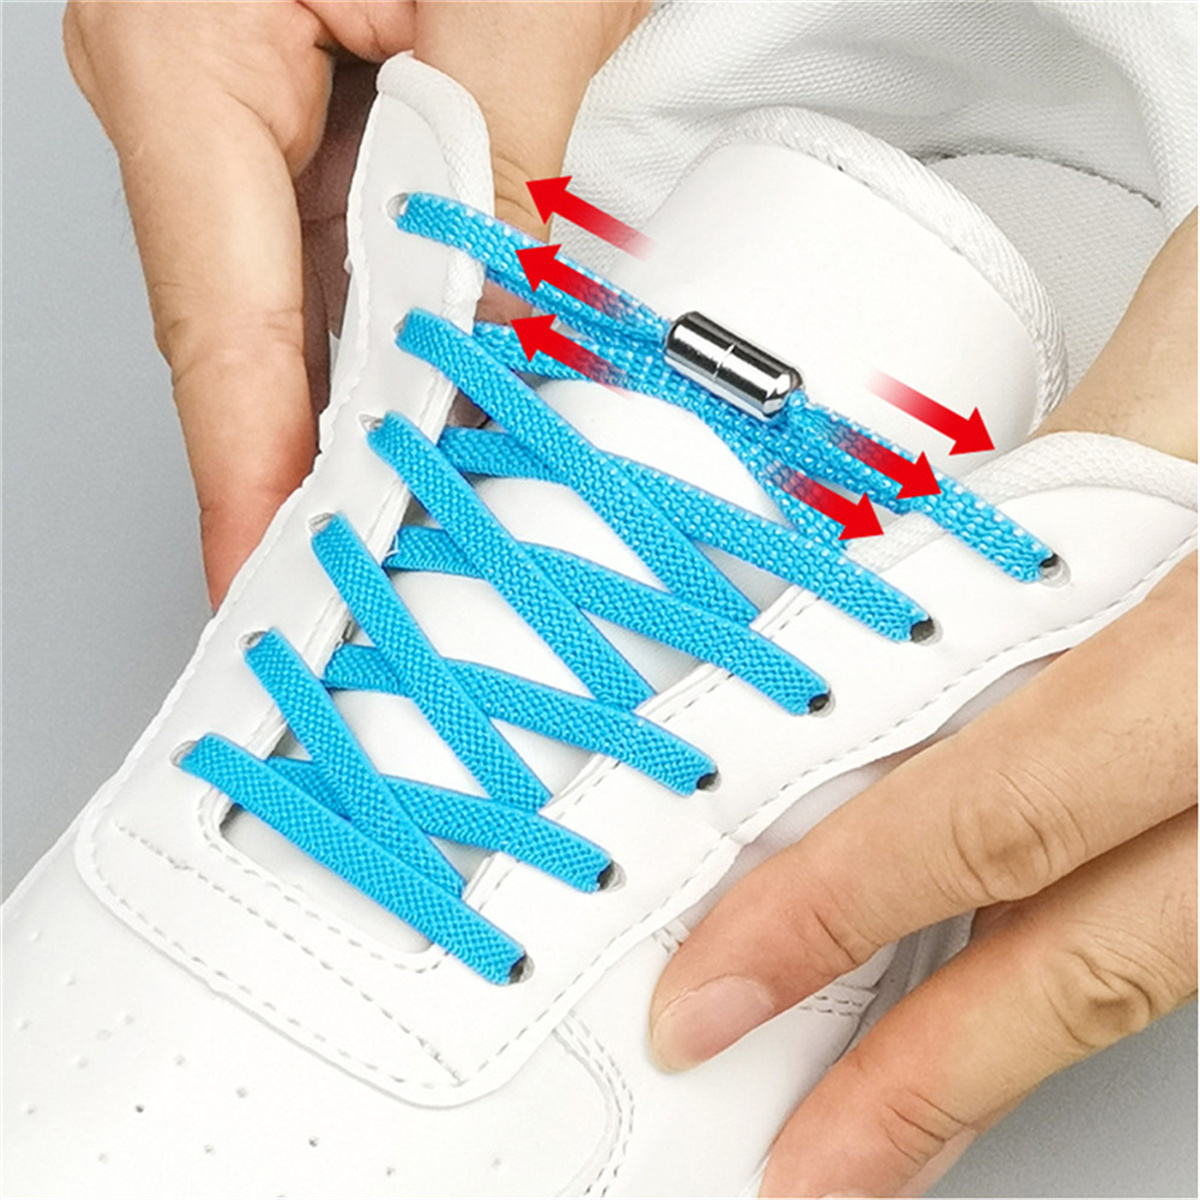 Dropship 1Pair 23 Colors Sneaker ShoeLaces Elastic No Tie Shoe Laces  Stretching Lock Lazy Laces Quick Rubber Shoelace Shoestrings to Sell Online  at a Lower Price